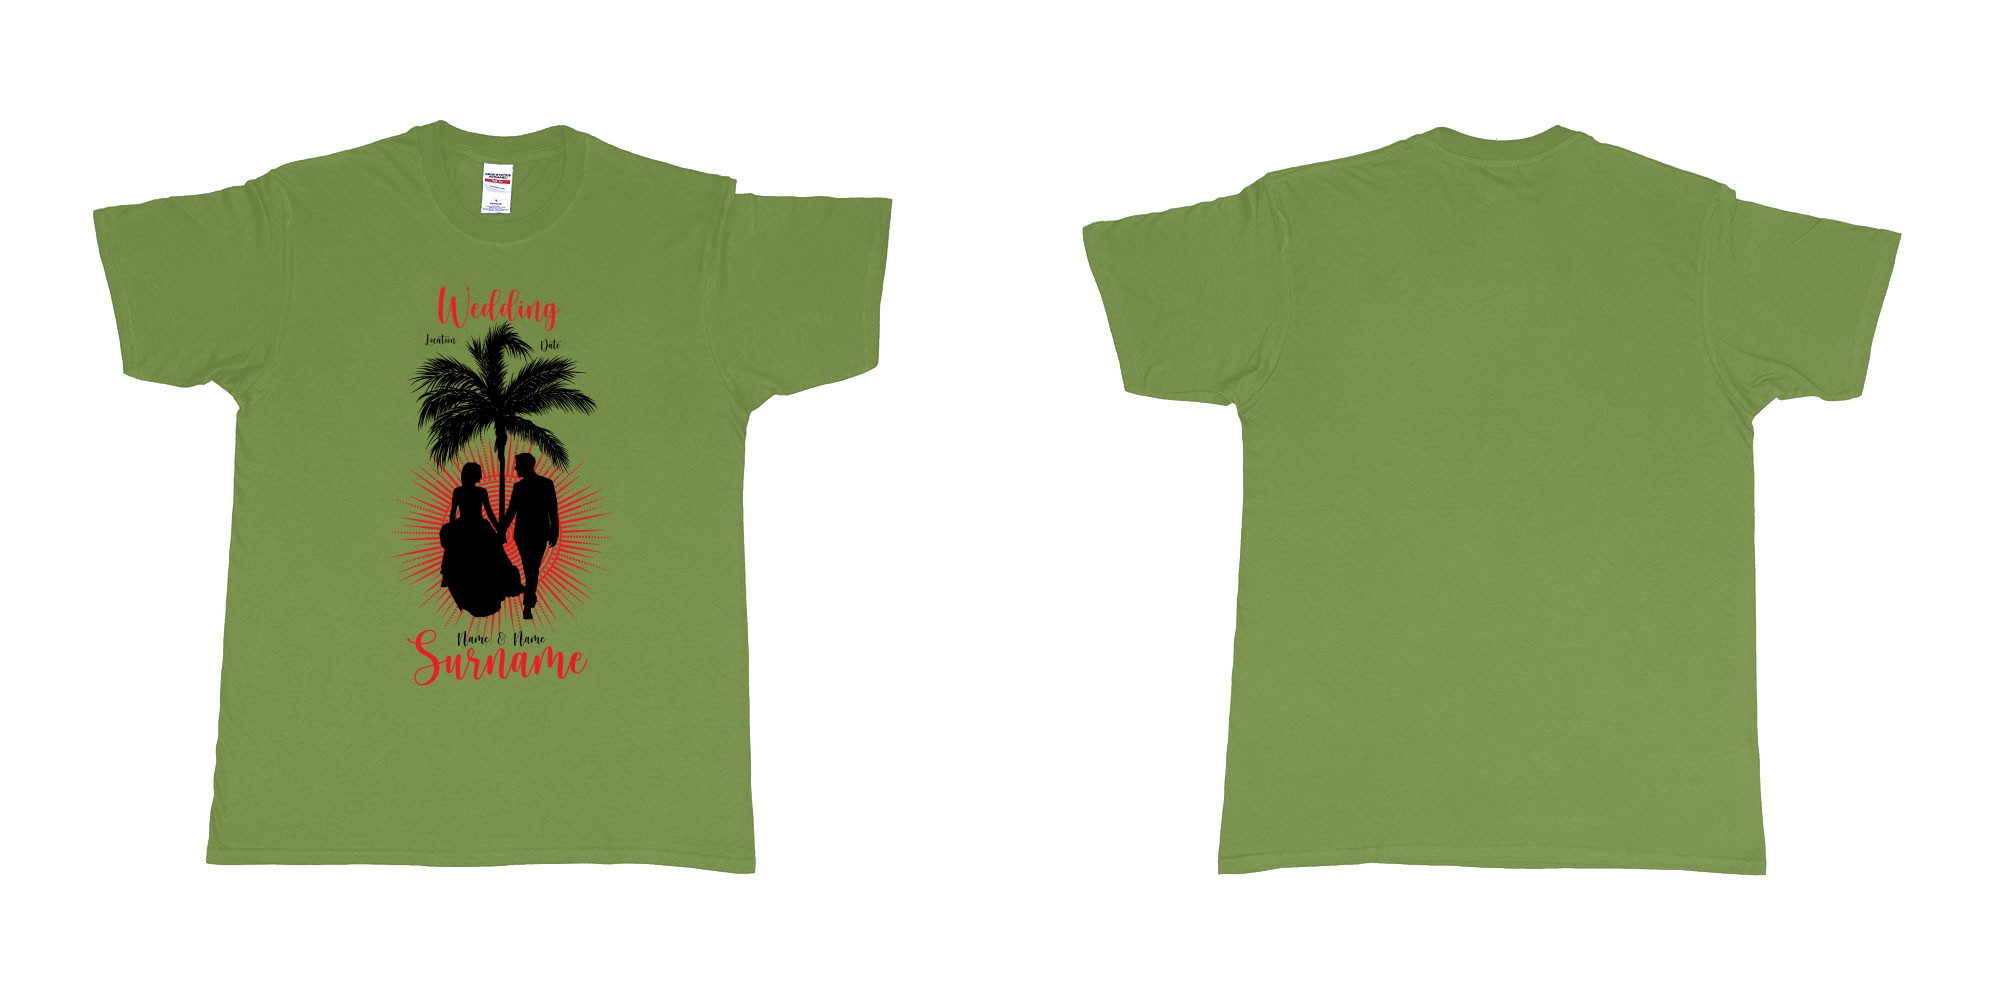 Custom tshirt design wedding palm sun bali in fabric color military-green choice your own text made in Bali by The Pirate Way